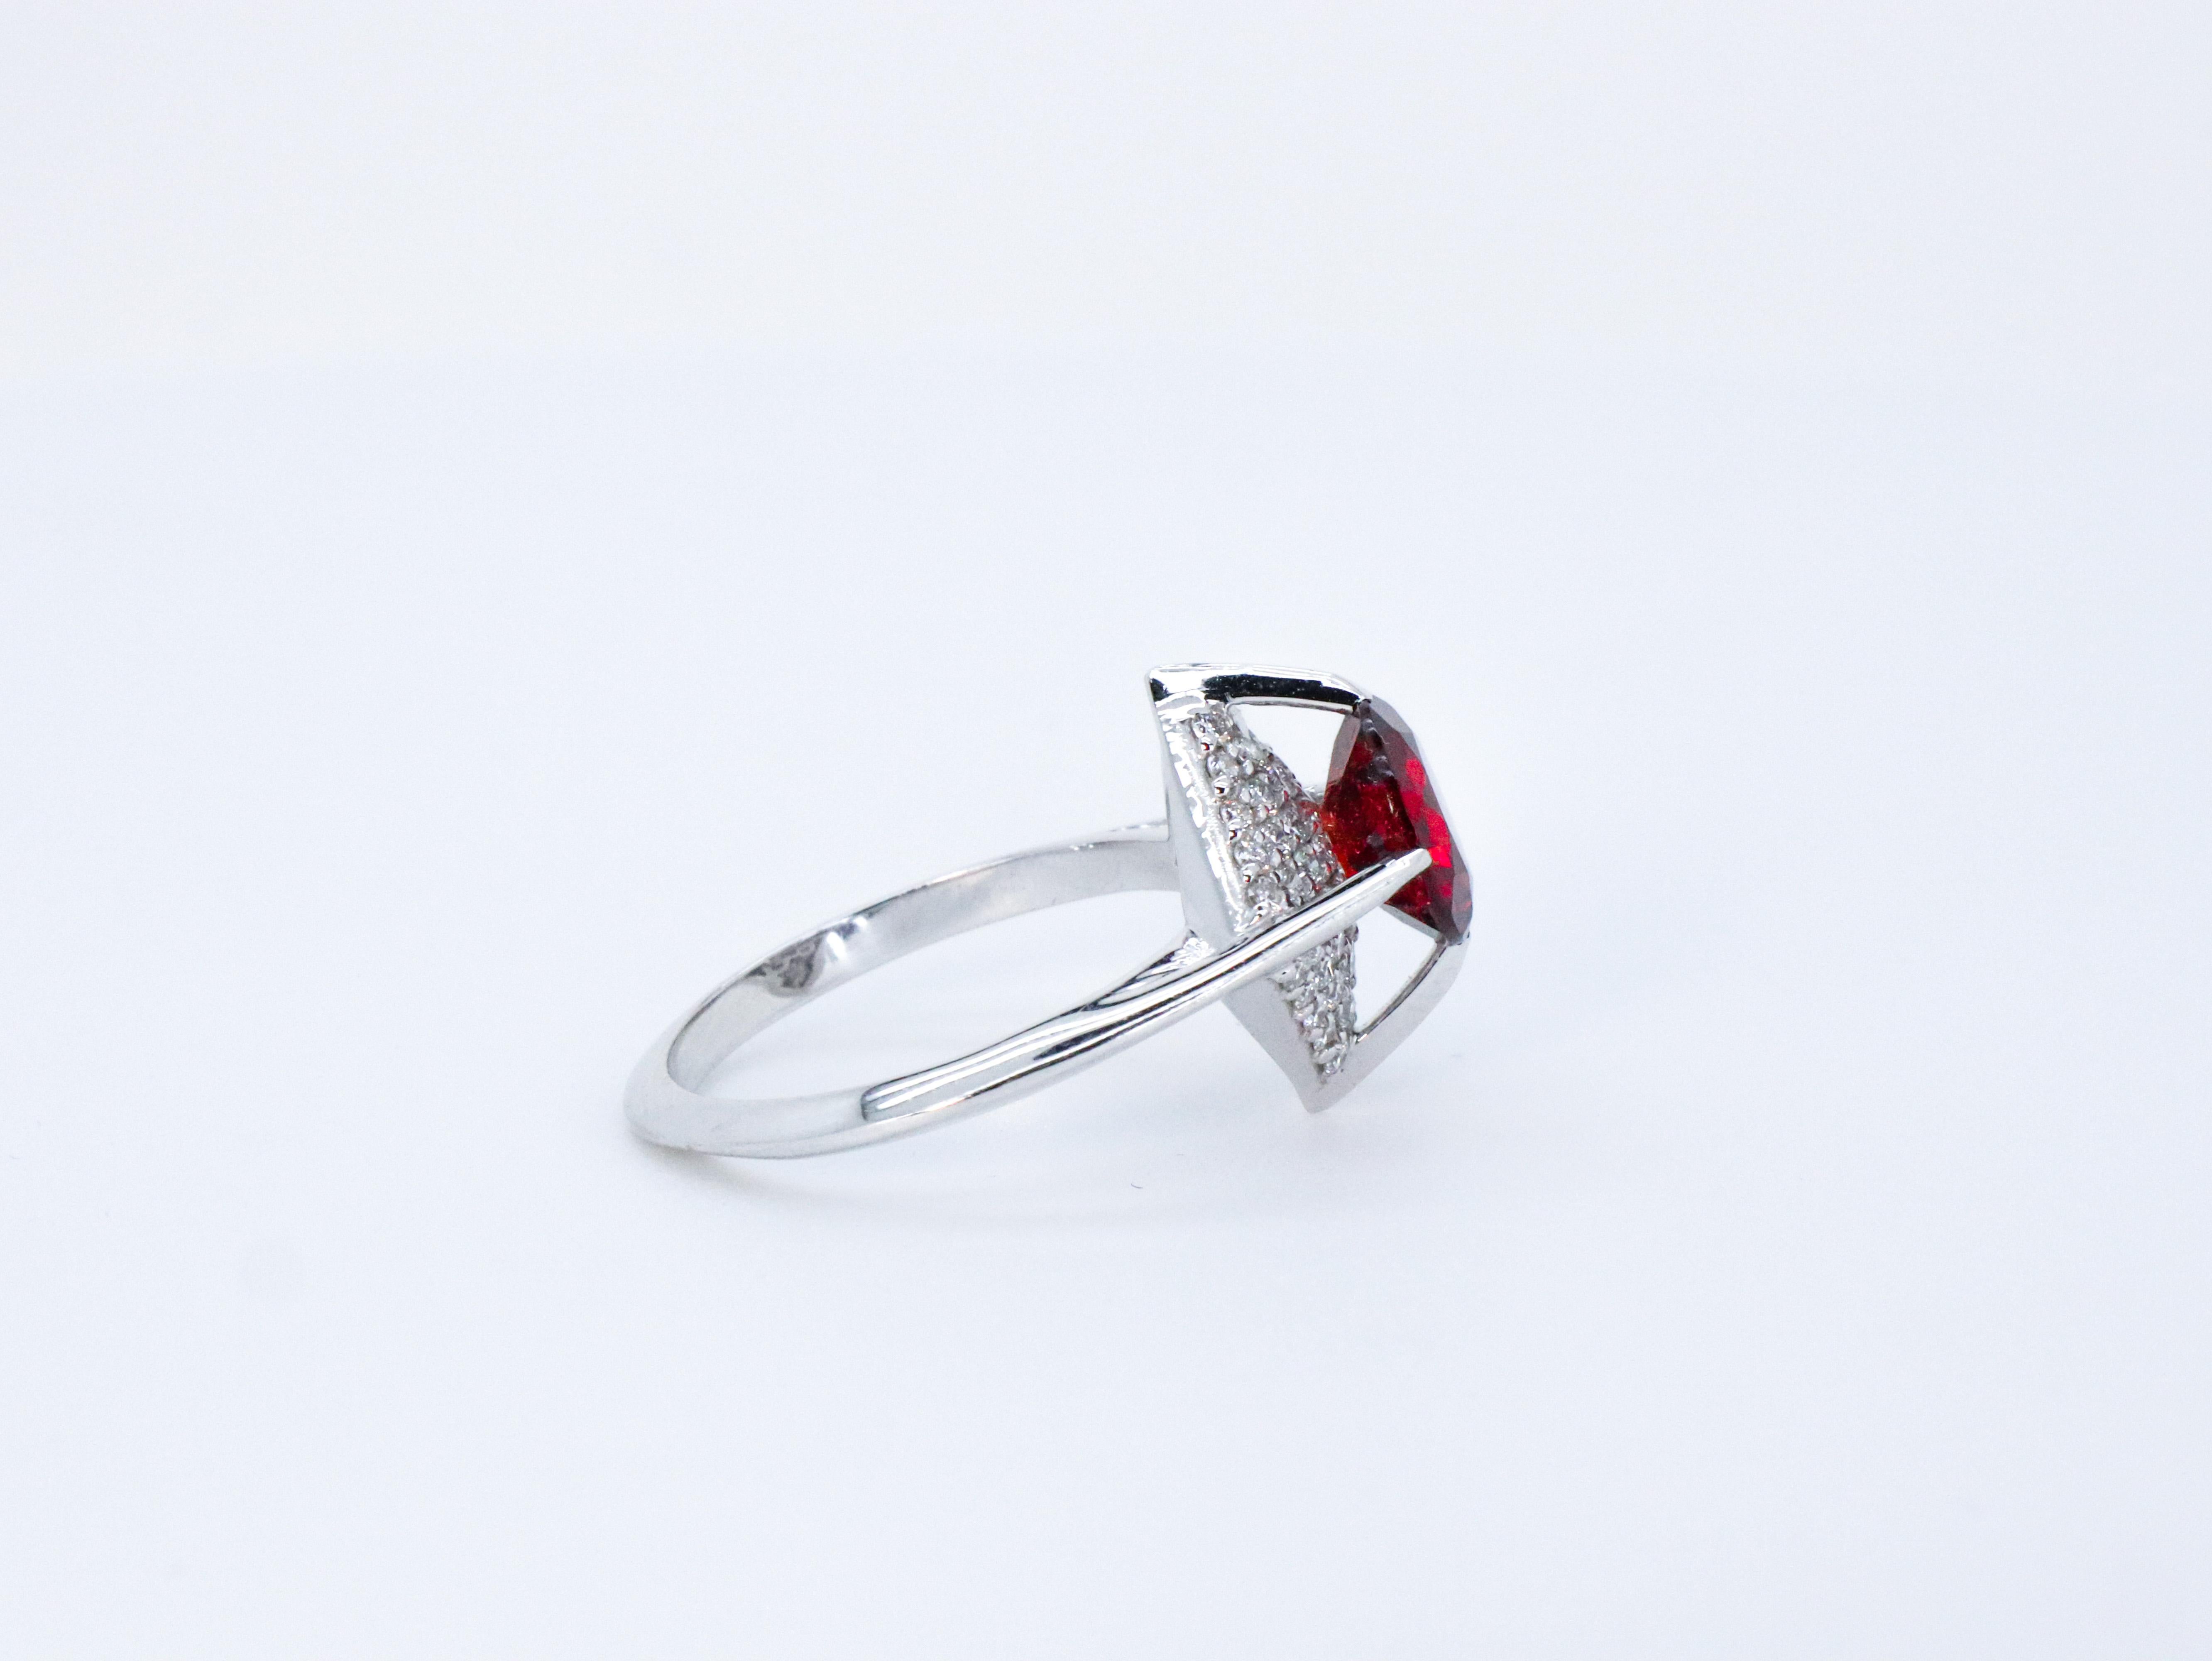 For Sale:  18K White Gold Made in Italy Diamond Rodolite Garnet Vogue Awarded Cocktail Ring 7